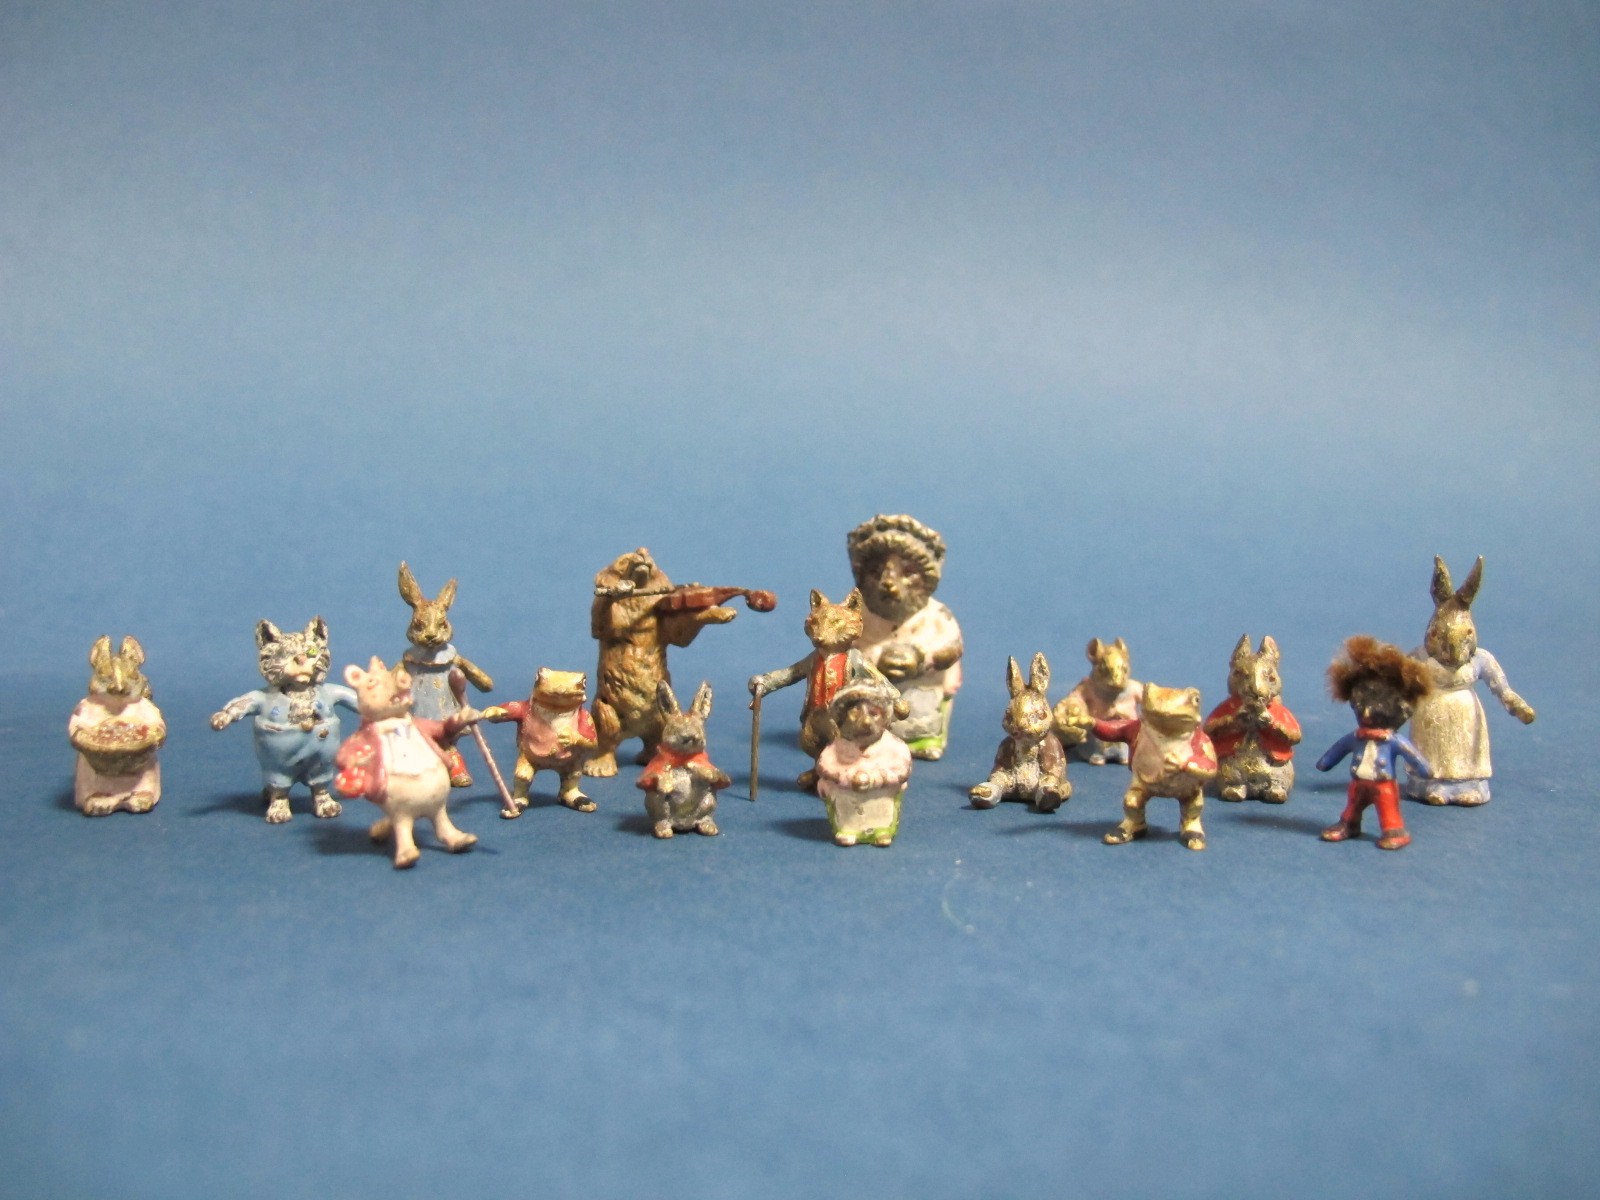 A Quantity of Miniature Bronze Cold Painted Figures, based on nursery rhyme and children's book